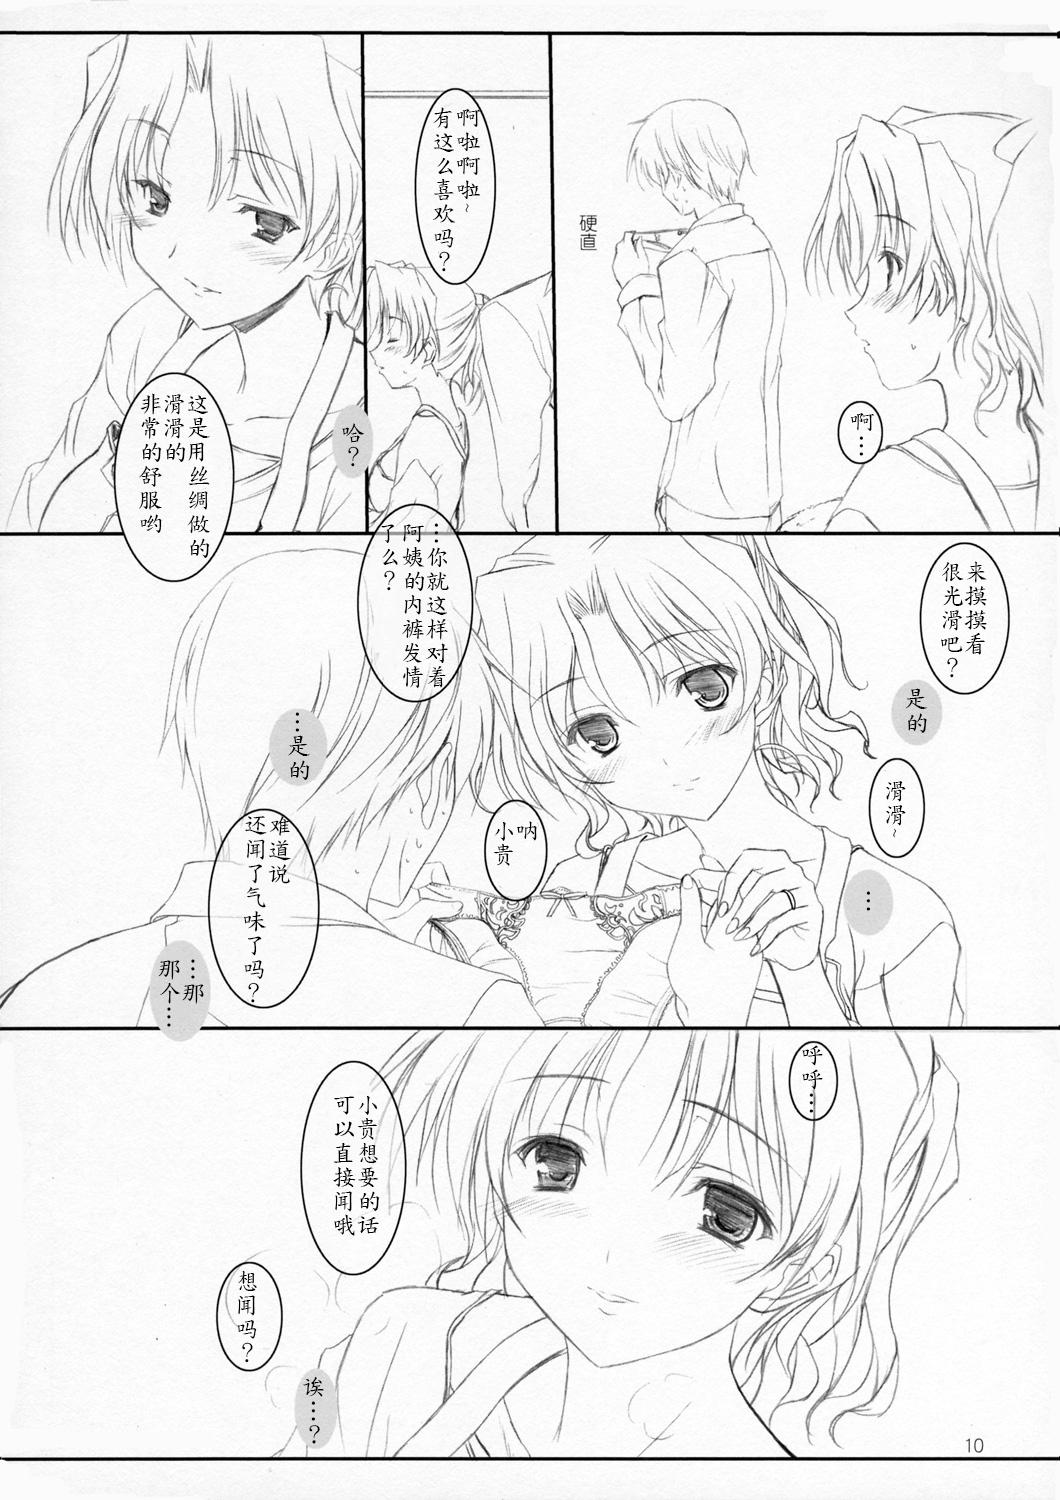 Awesome Harukasan to Asoboo~ - Toheart2 Free Blowjobs - Page 9